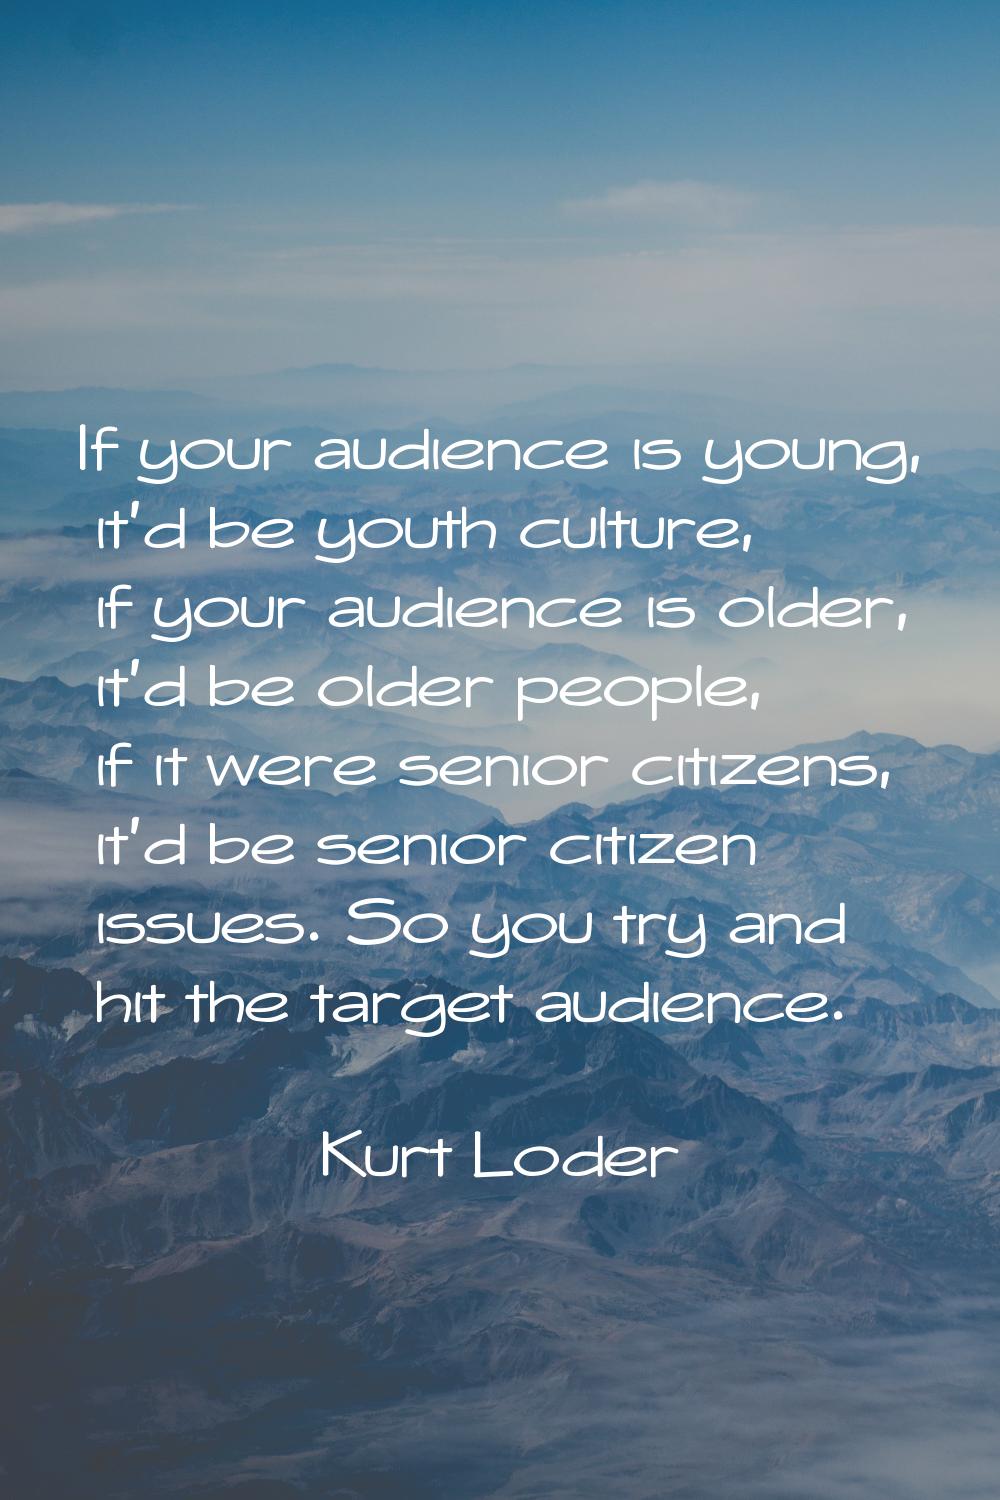 If your audience is young, it'd be youth culture, if your audience is older, it'd be older people, 